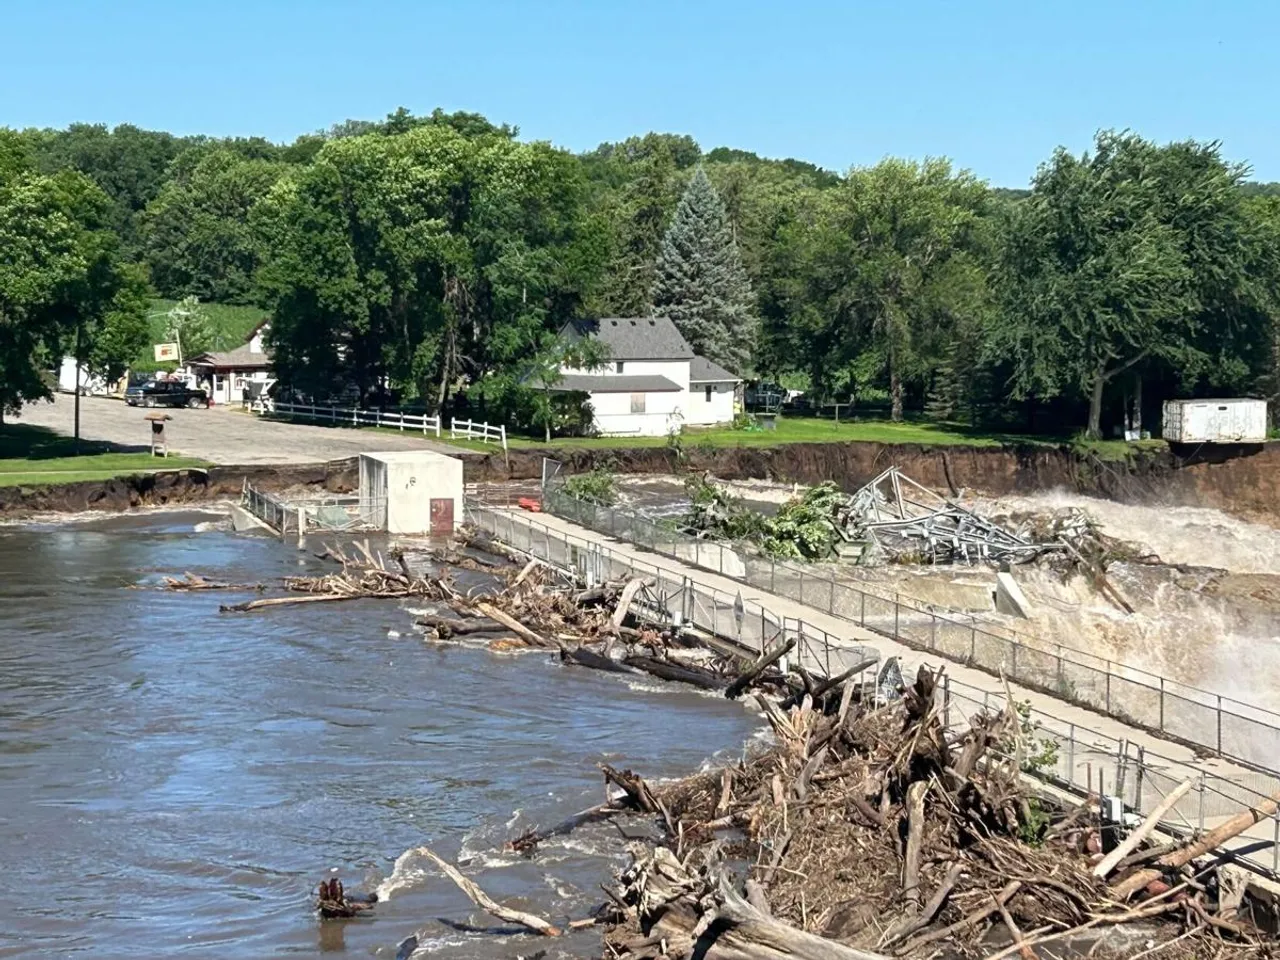 Minnesota's Rapidan Dam is in imminent danger of failure due to accumulated debris and severe flooding.